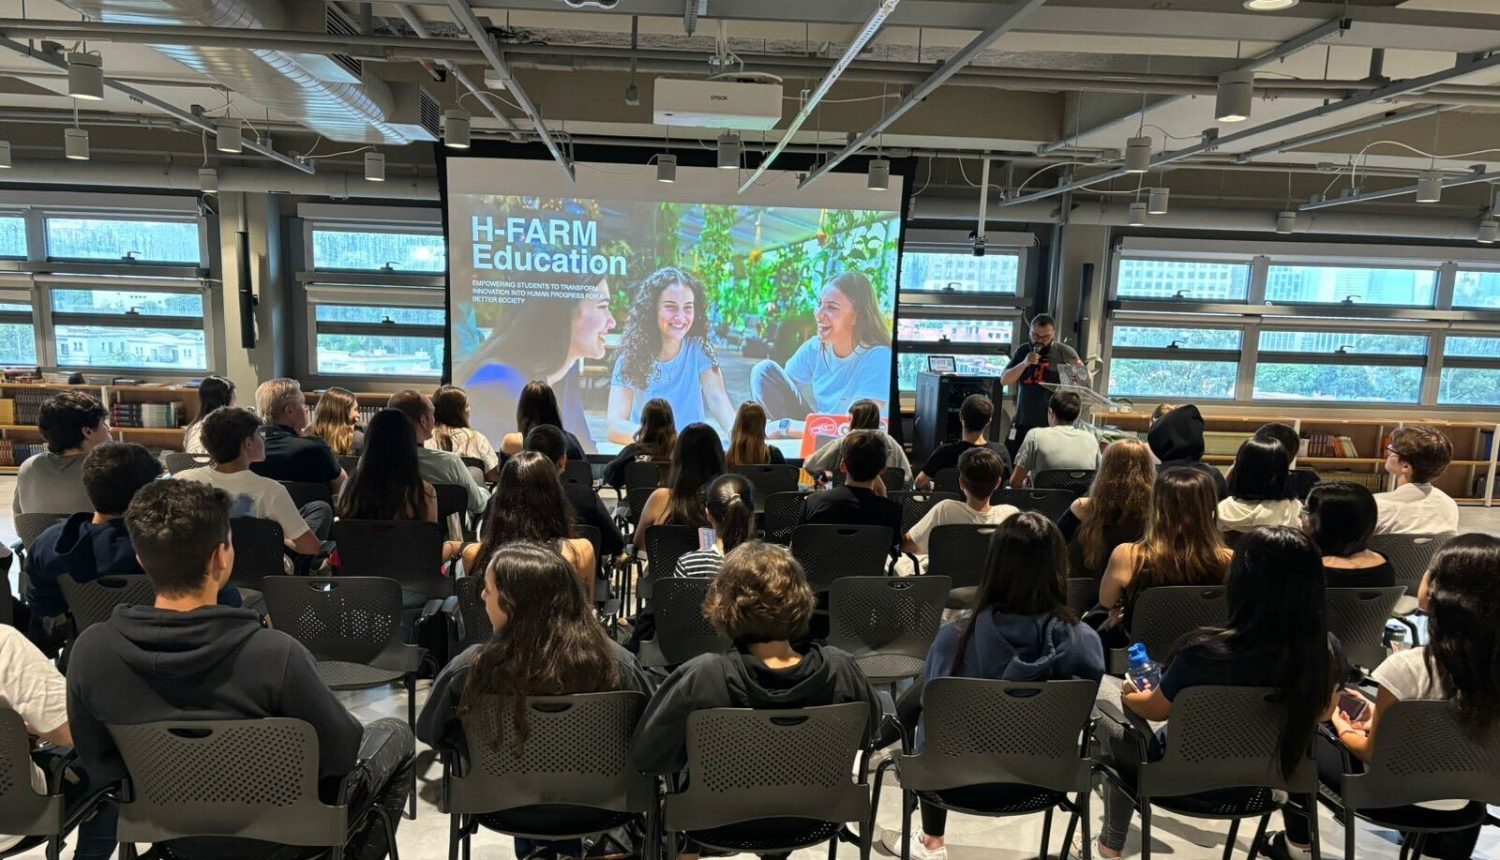 H-FARM College and Spark together for an entrepreneurship hackathon aimed at young students in São Paulo